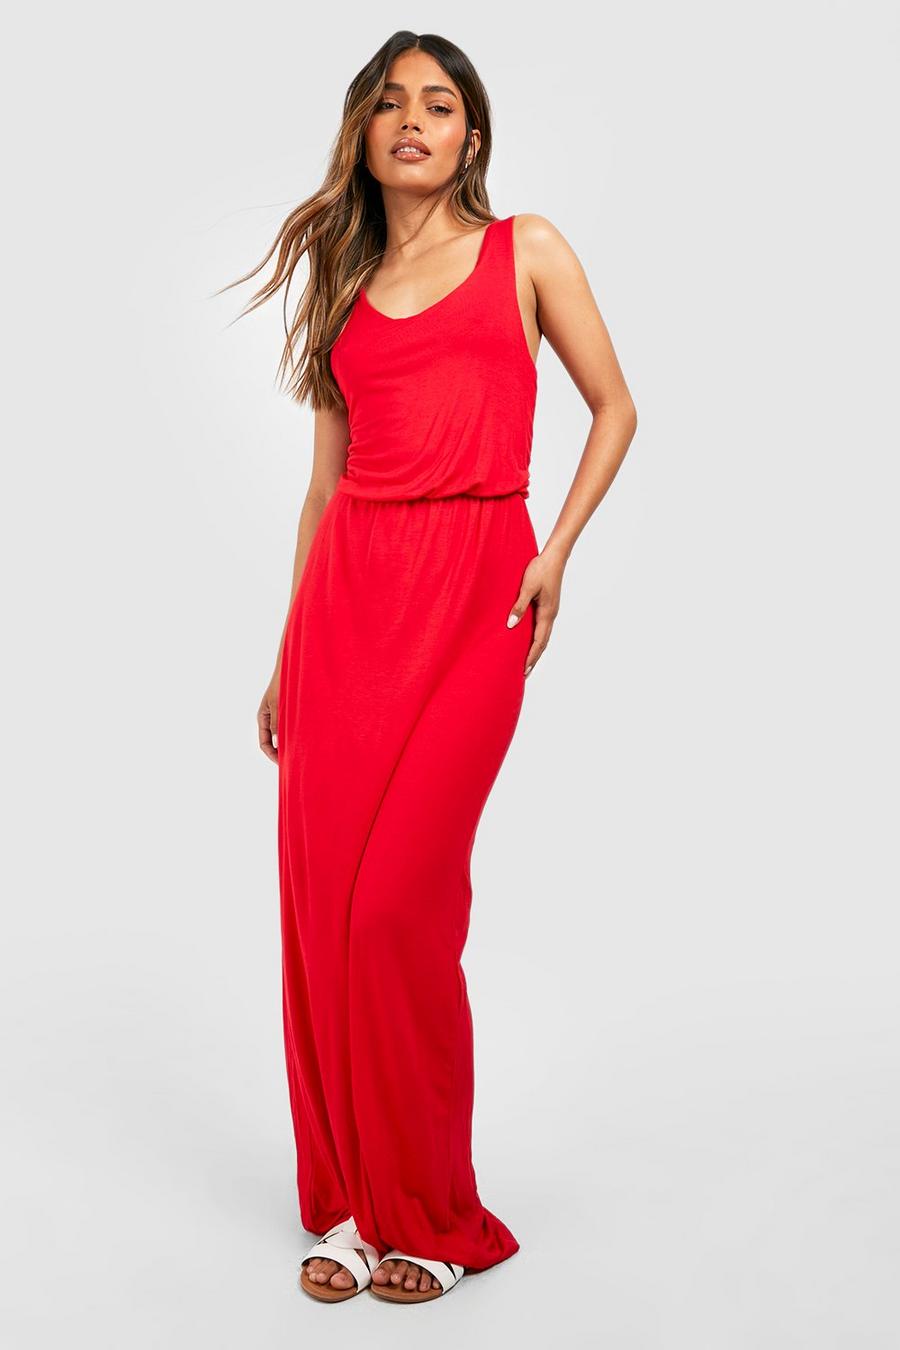 Red Racer Back Maxi Dress